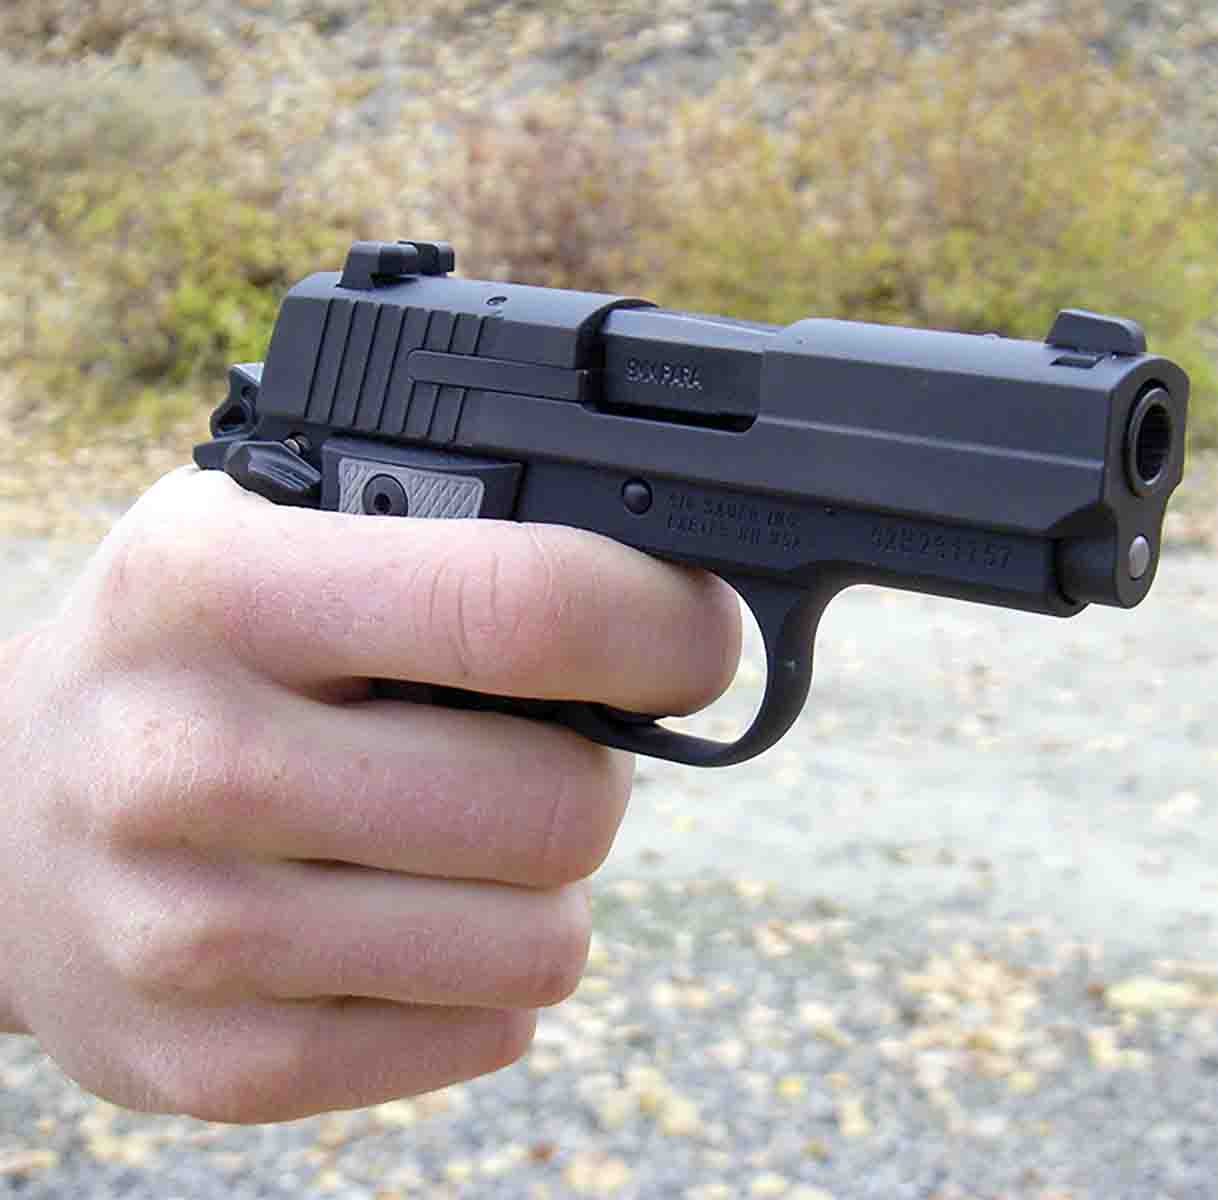 The P938 9mm Luger handled well, was reliable and accurate, and is a reasonable option for a compact pistol.